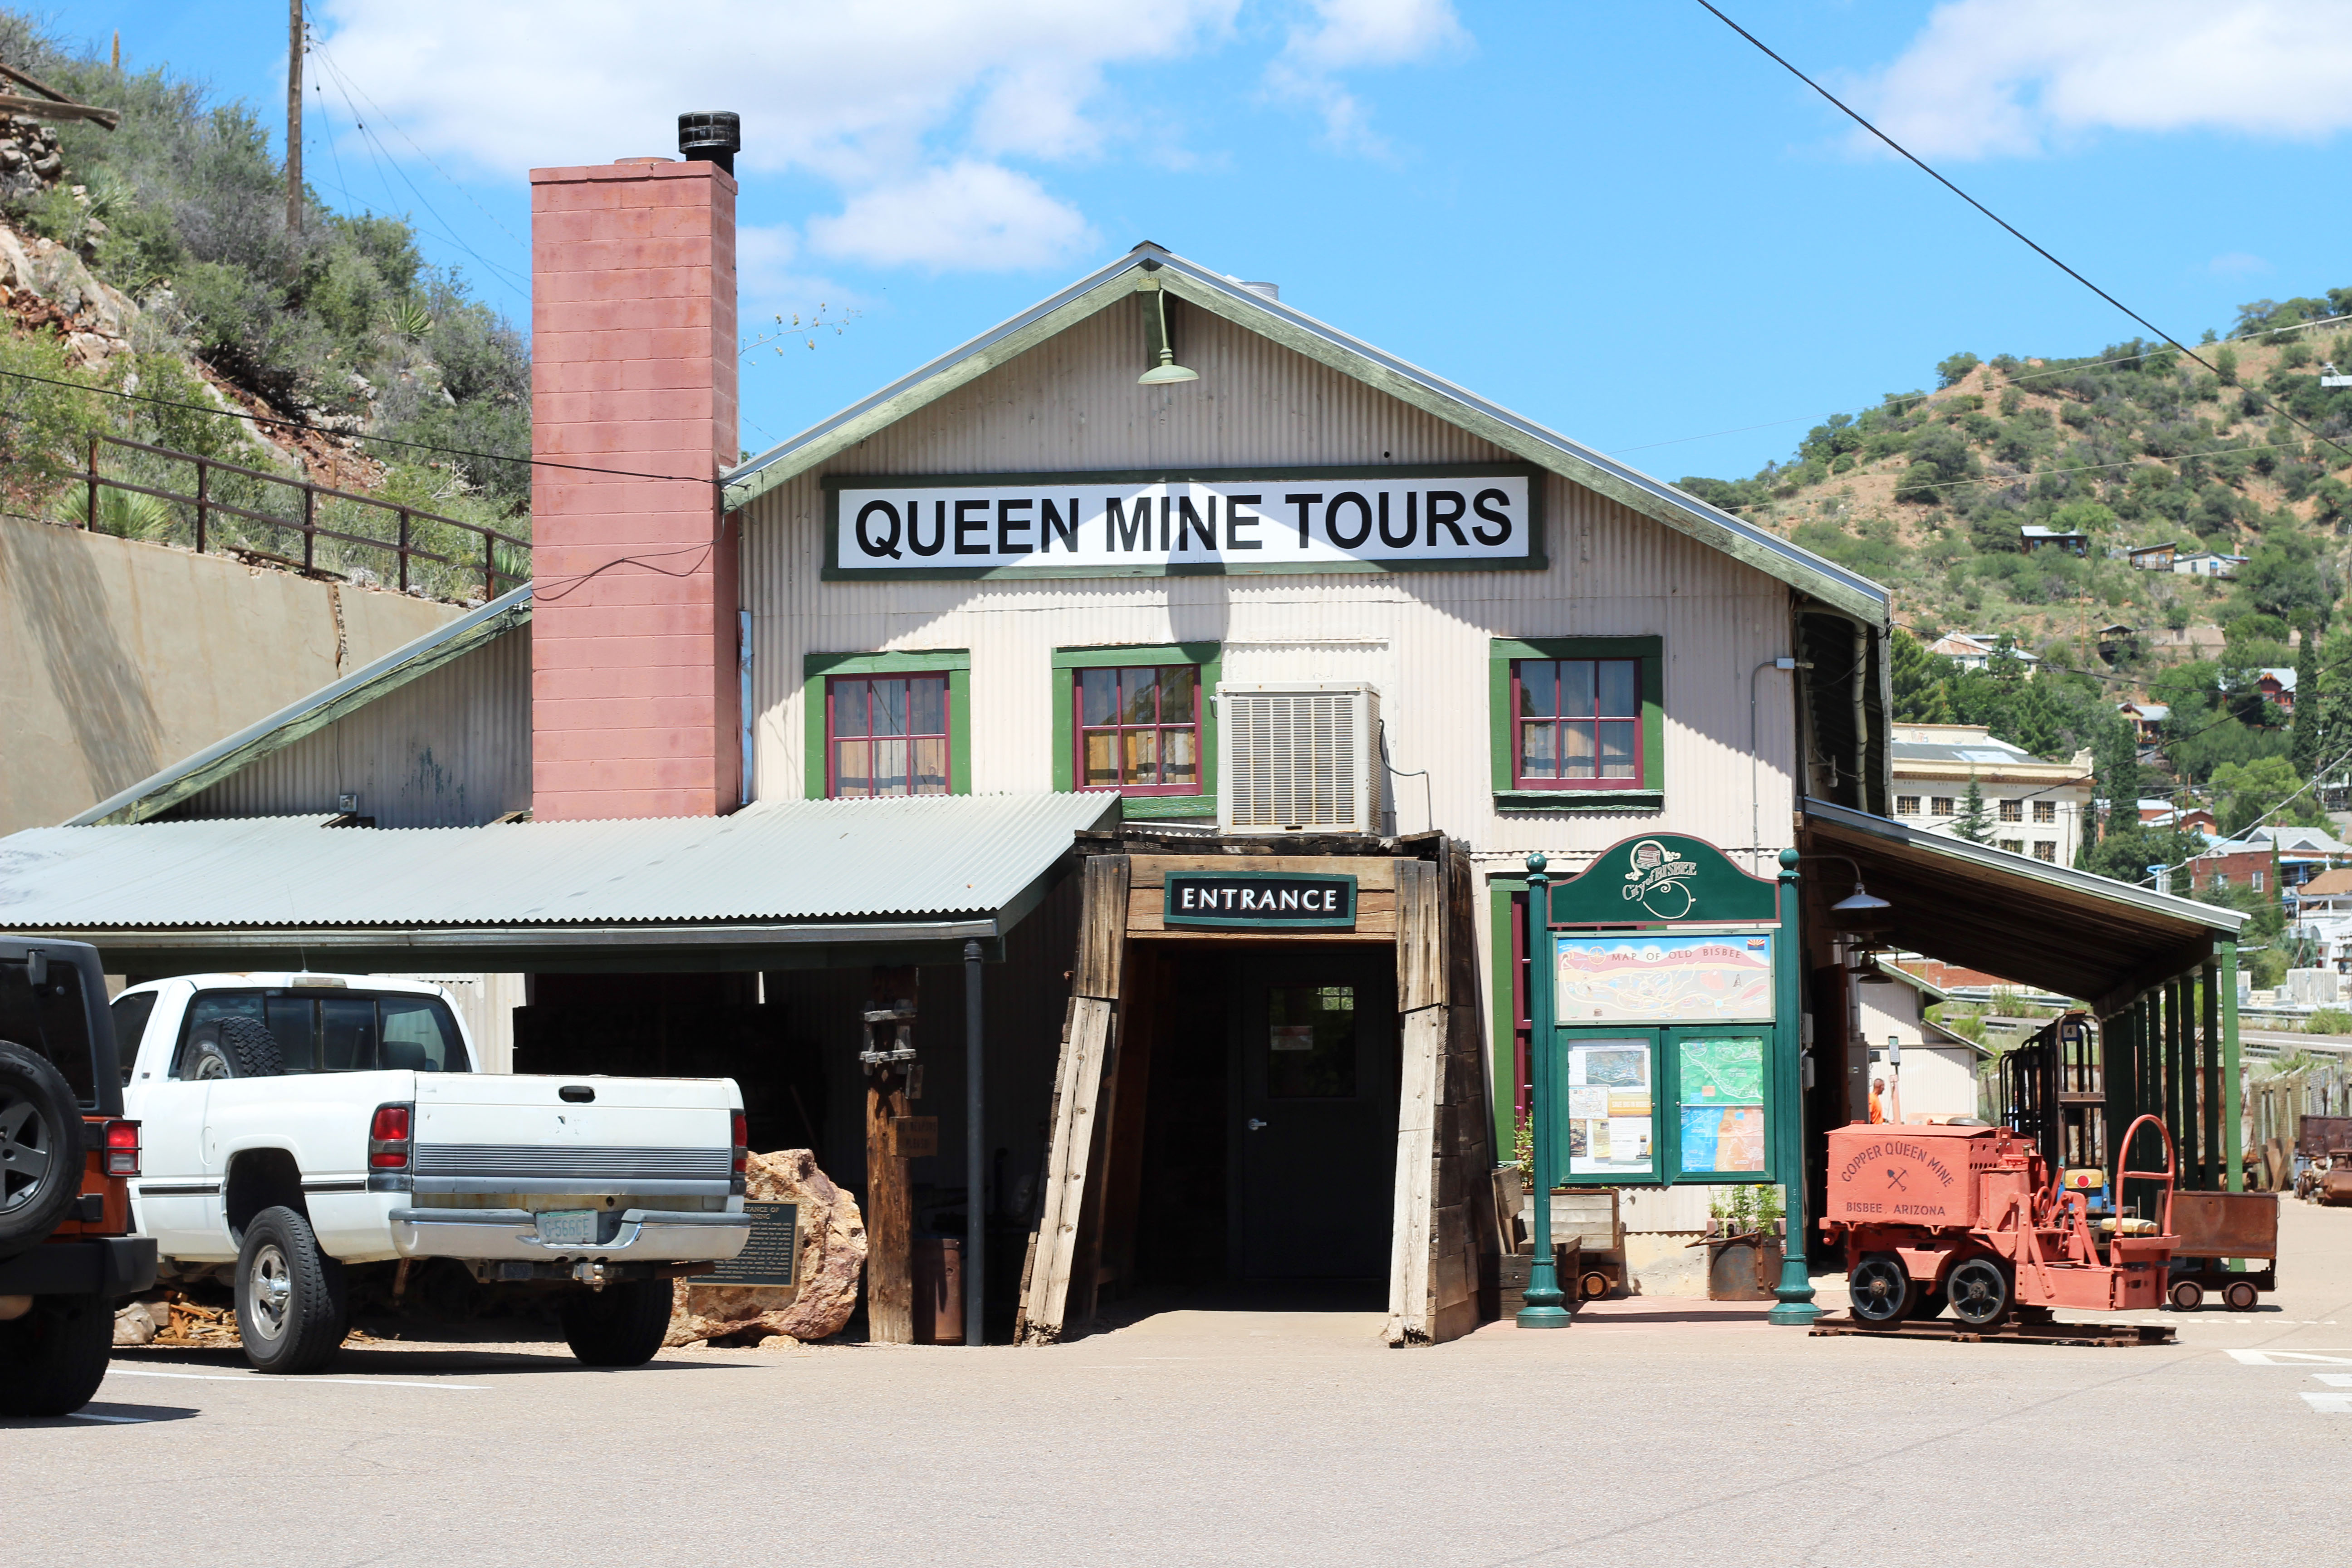 Almost 100 years after the opening of Bisbee's Queen Mine, the Queen Mine Tours opened to the public in 1976. About 50,000 people visit the mine each year. 